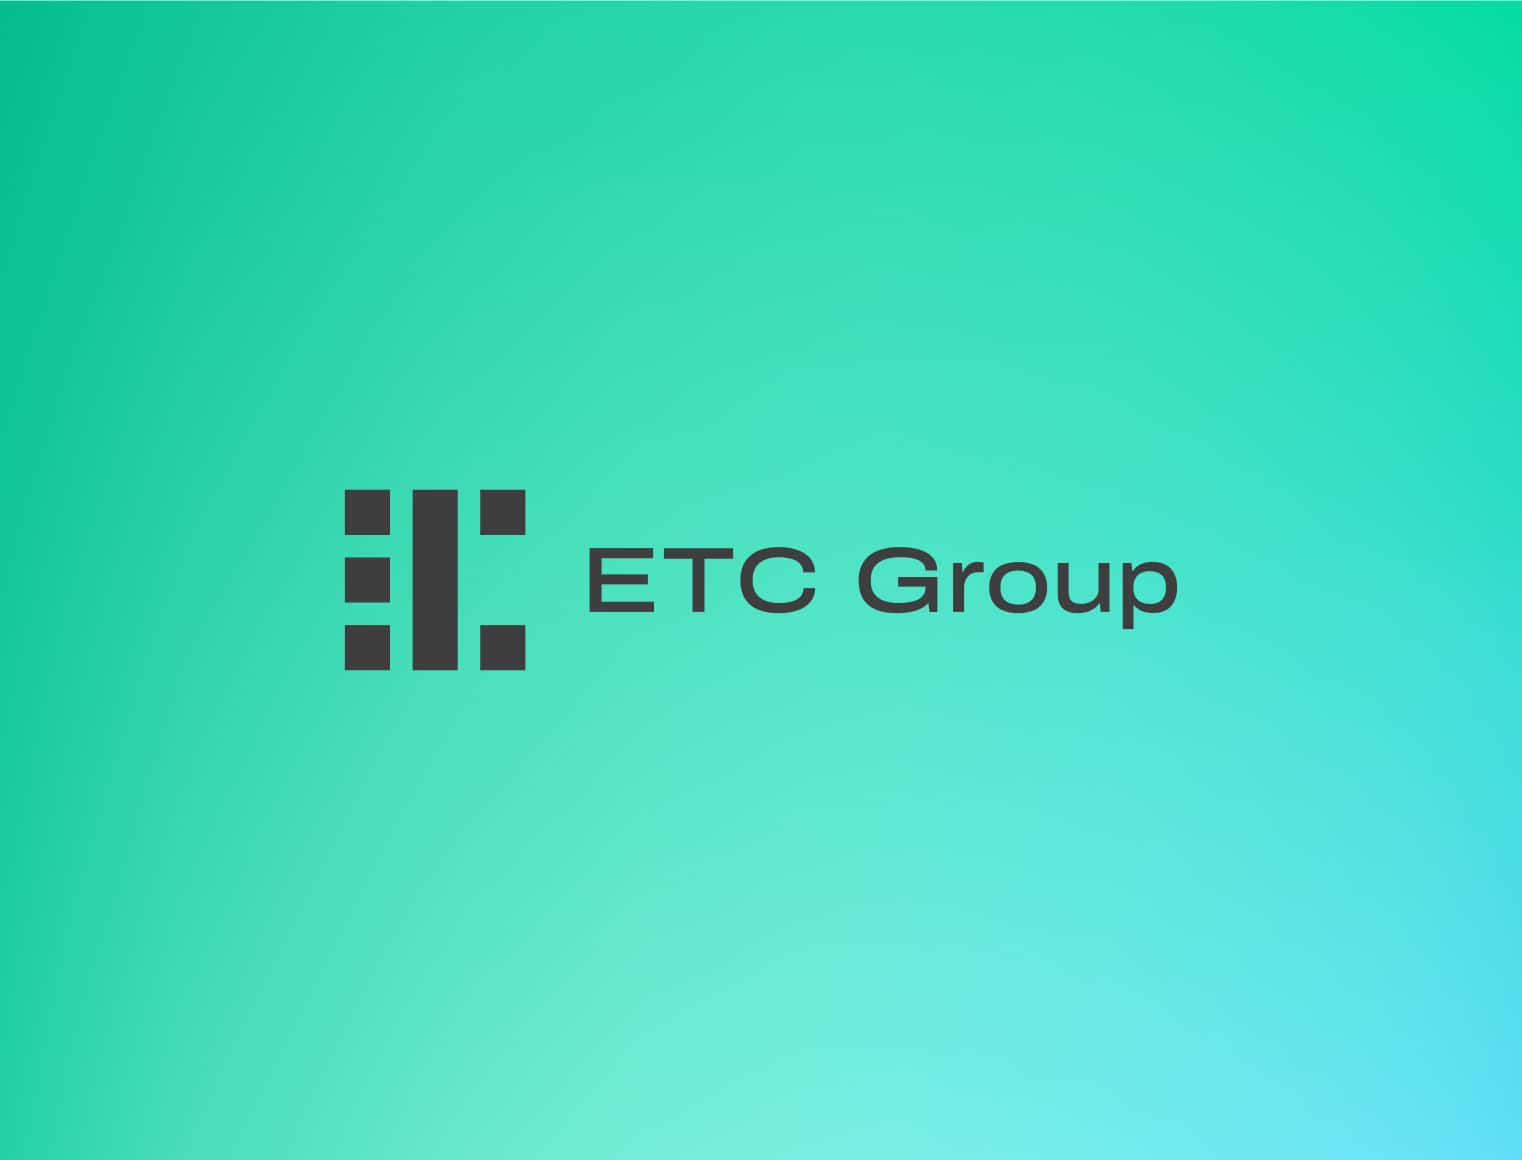 Launch of Digital Assets & Blockchain Equity UCITS ETF